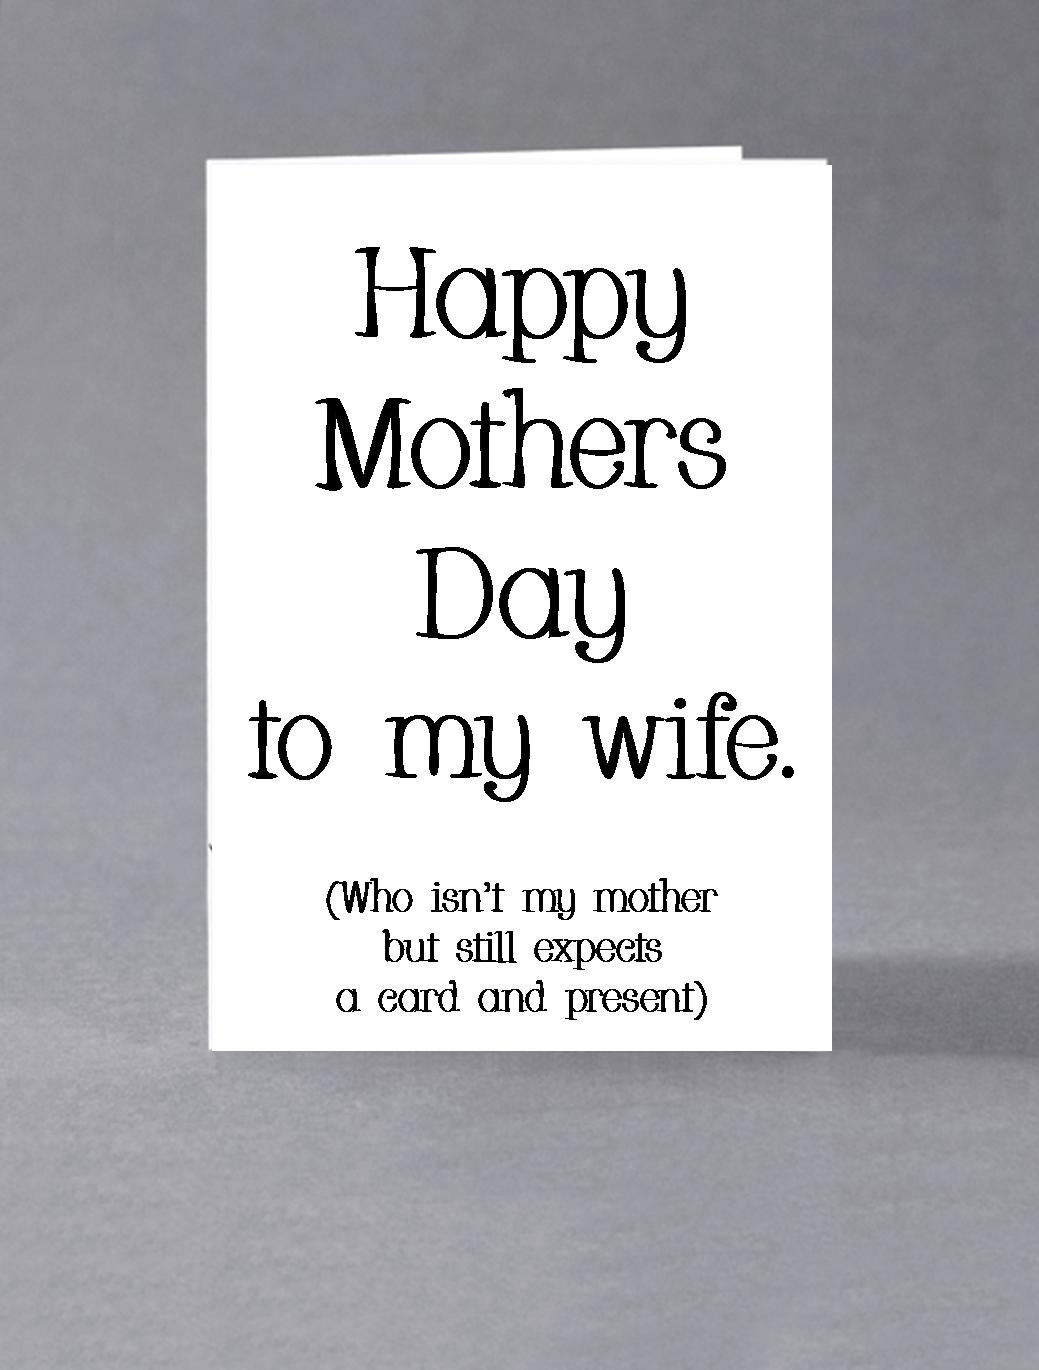 funny-sarcastic-mothers-day-card-happy-mother-s-day-to